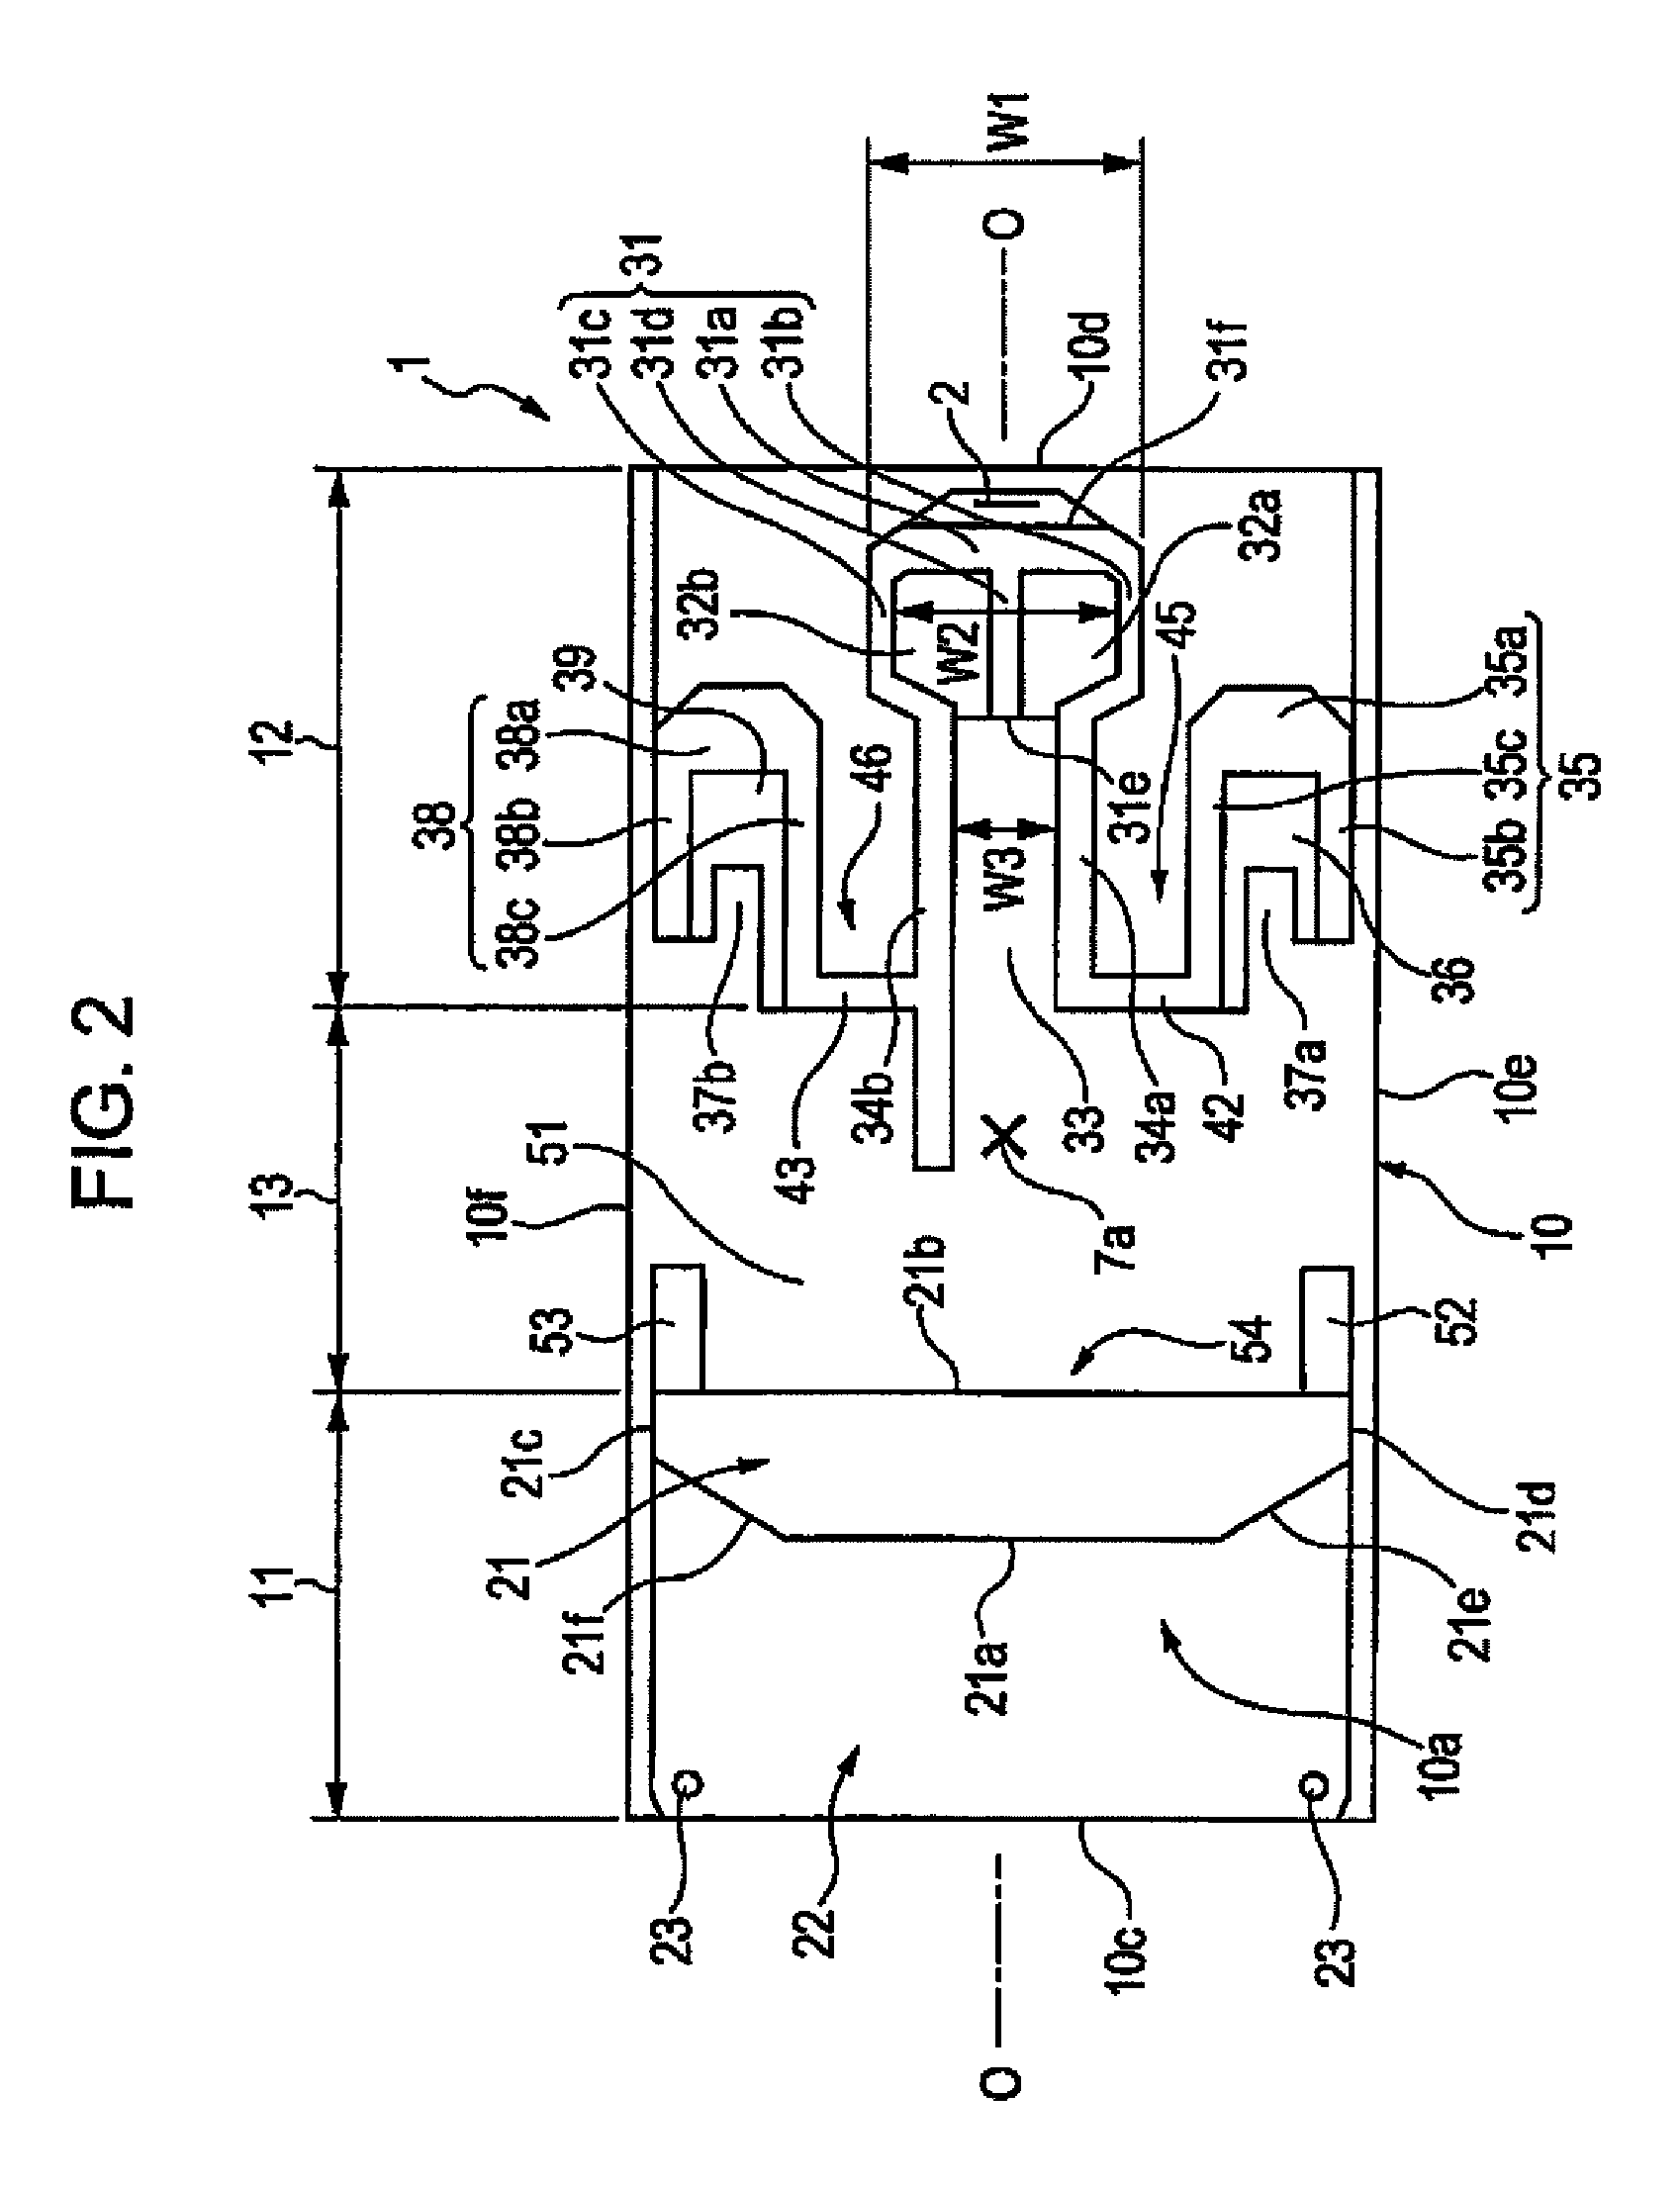 Magnetic head device having rear positive pressure surface and rear side positive pressure surface